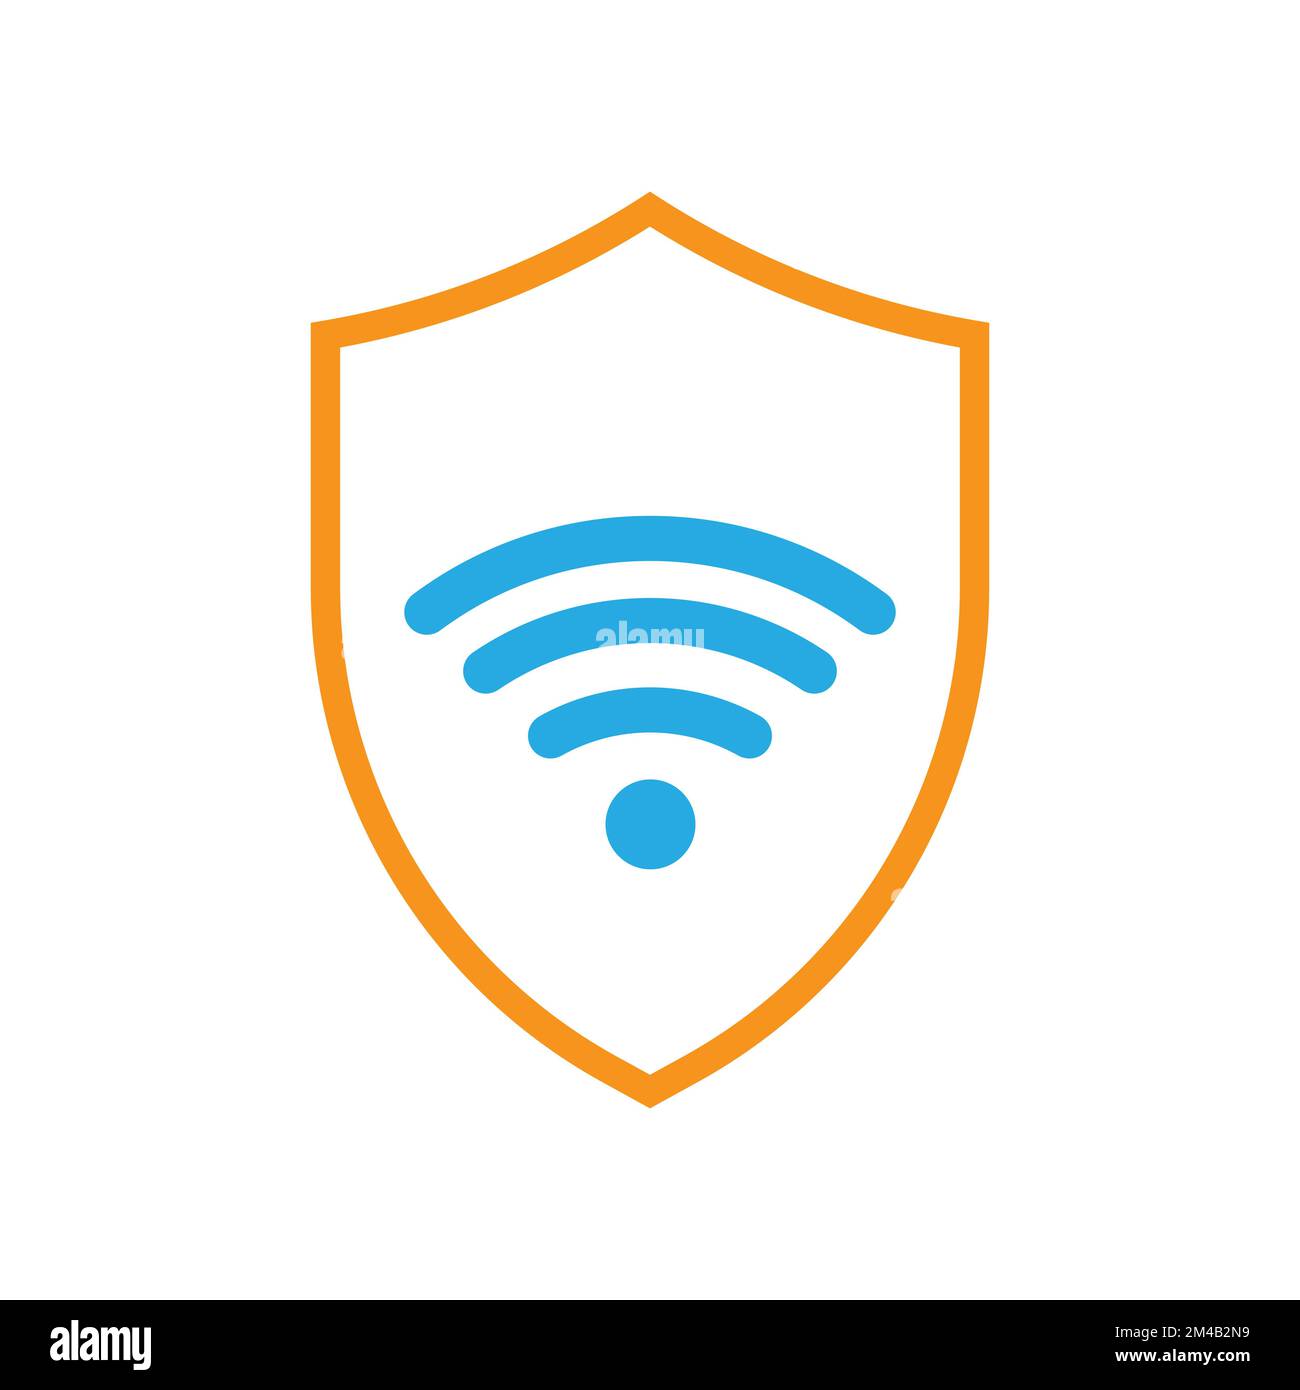 Hotspot shield ogo protected wifi connection icon Vector Image